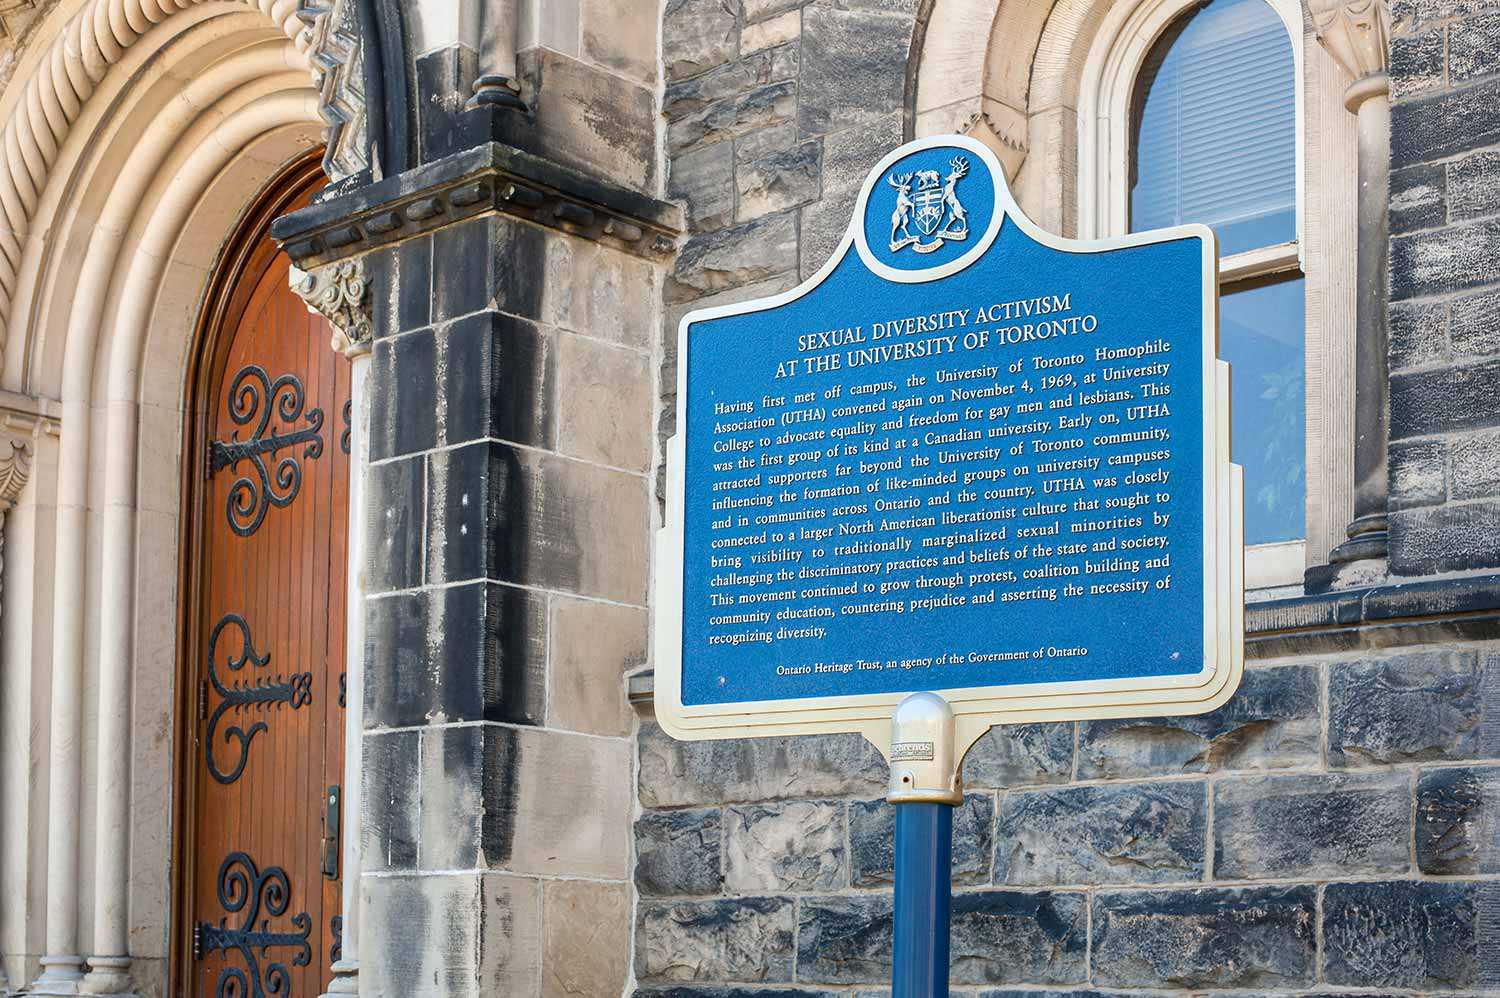 Provincial plaque commemorating Sexual Diversity Activism at the University of Toronto